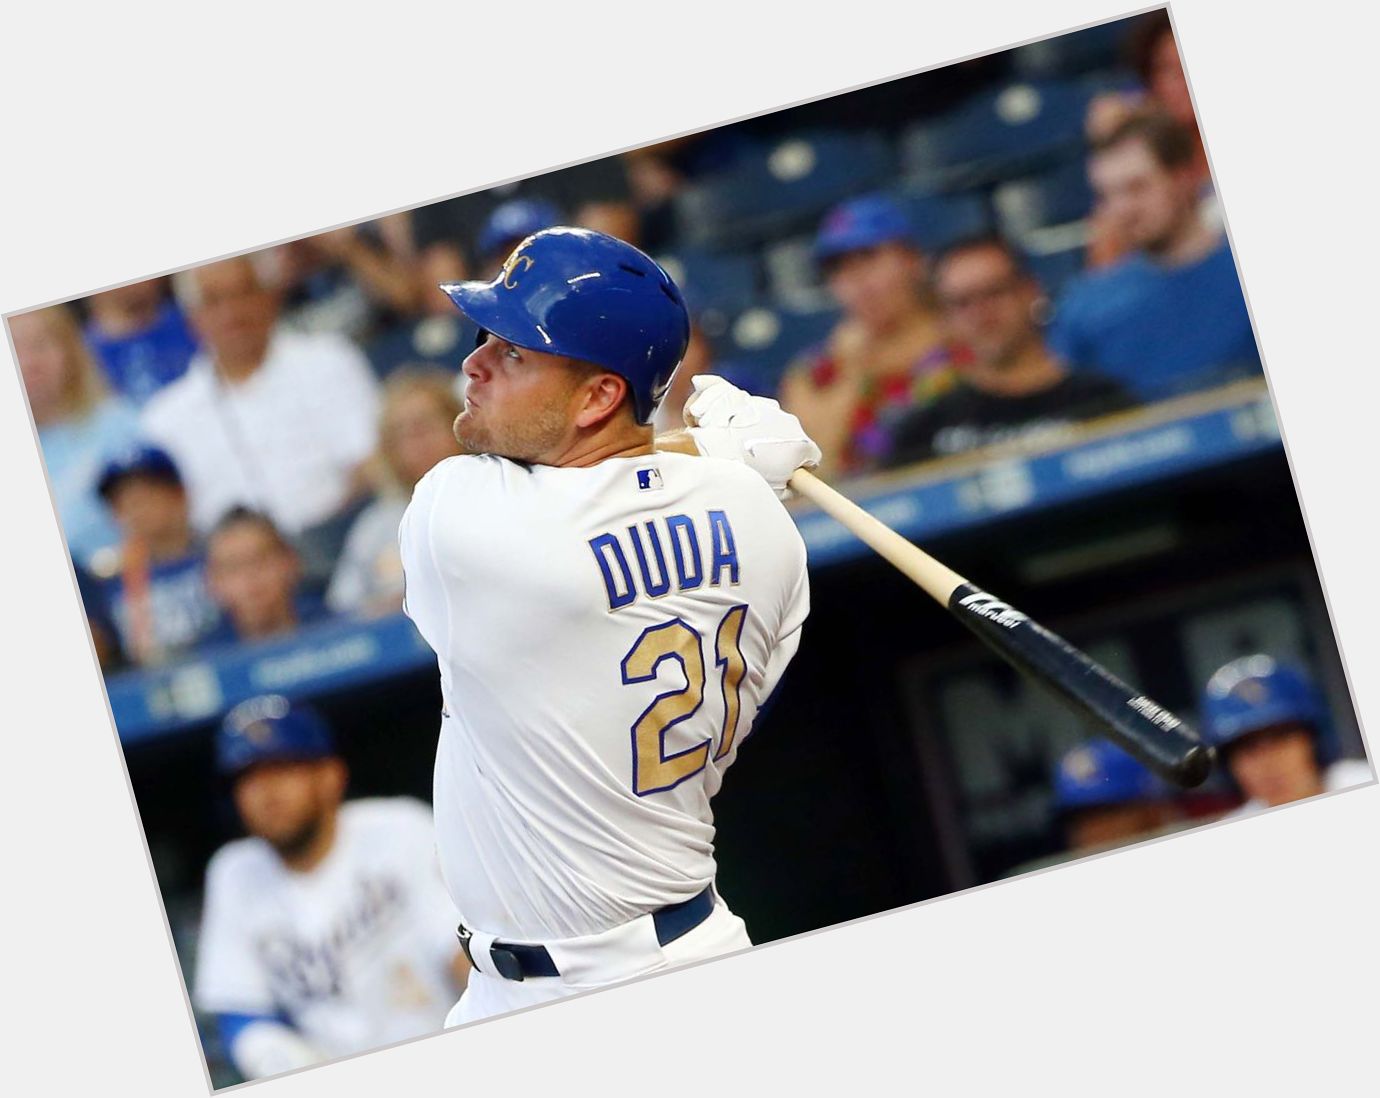 Happy Birthday to former Kansas City Royals player Lucas Duda(2018), who turns 33 today! 